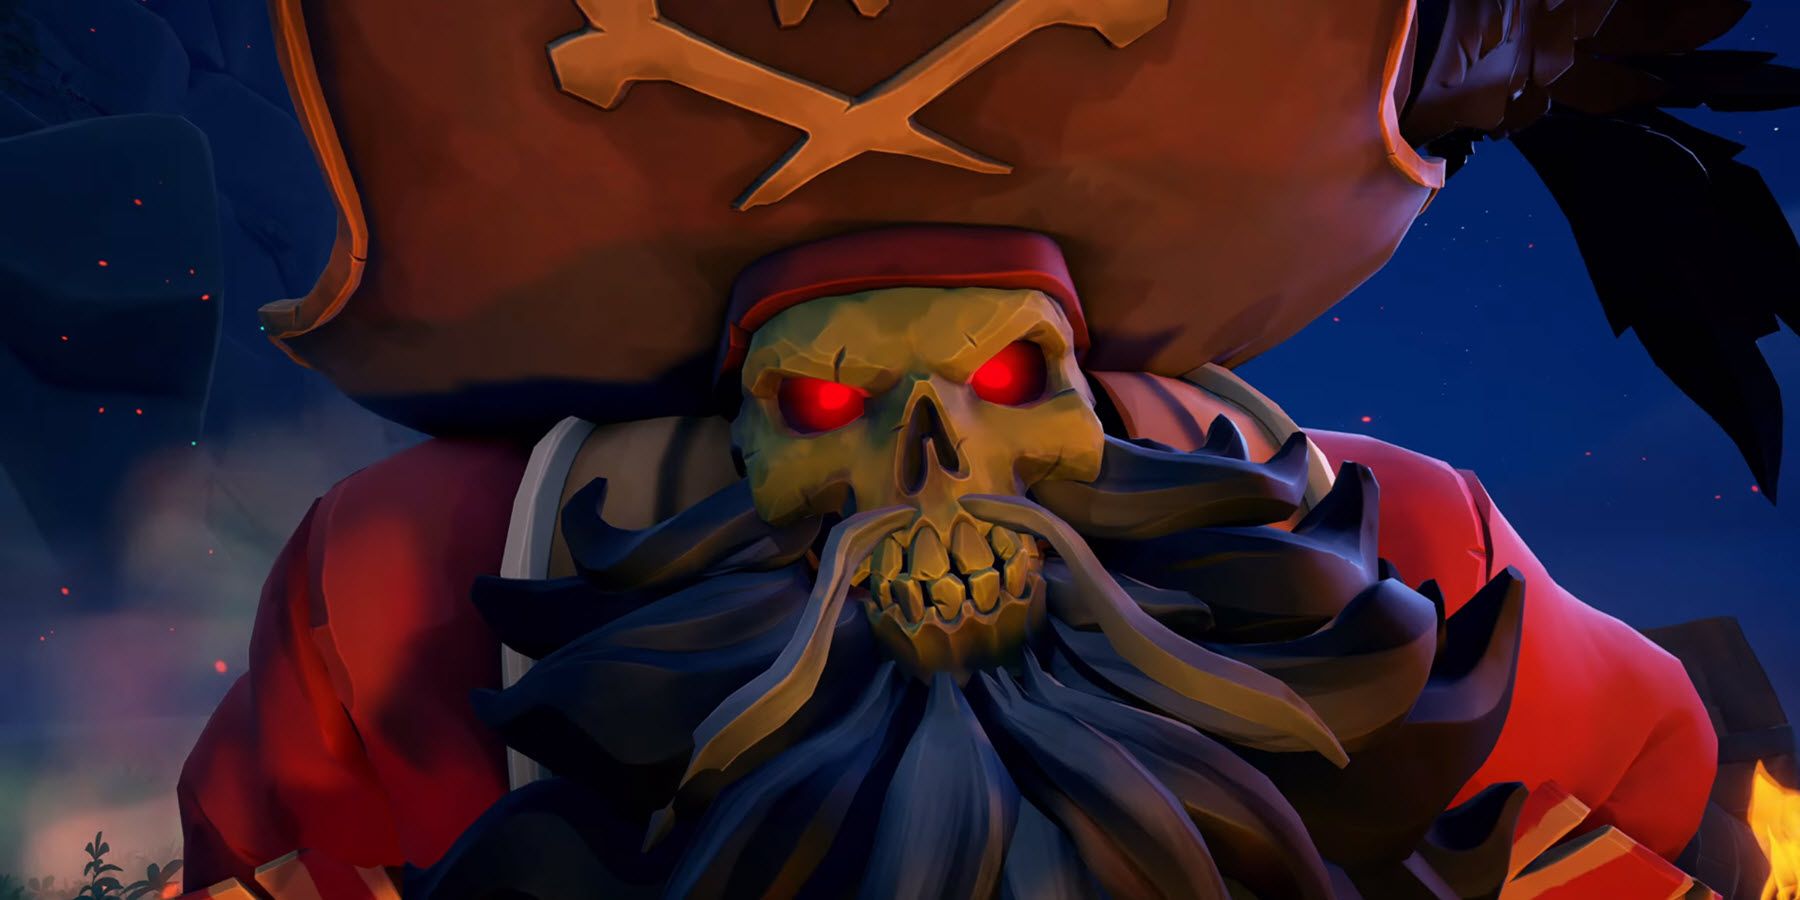 sea-of-thieves-is-crossing-over-with-monkey-island